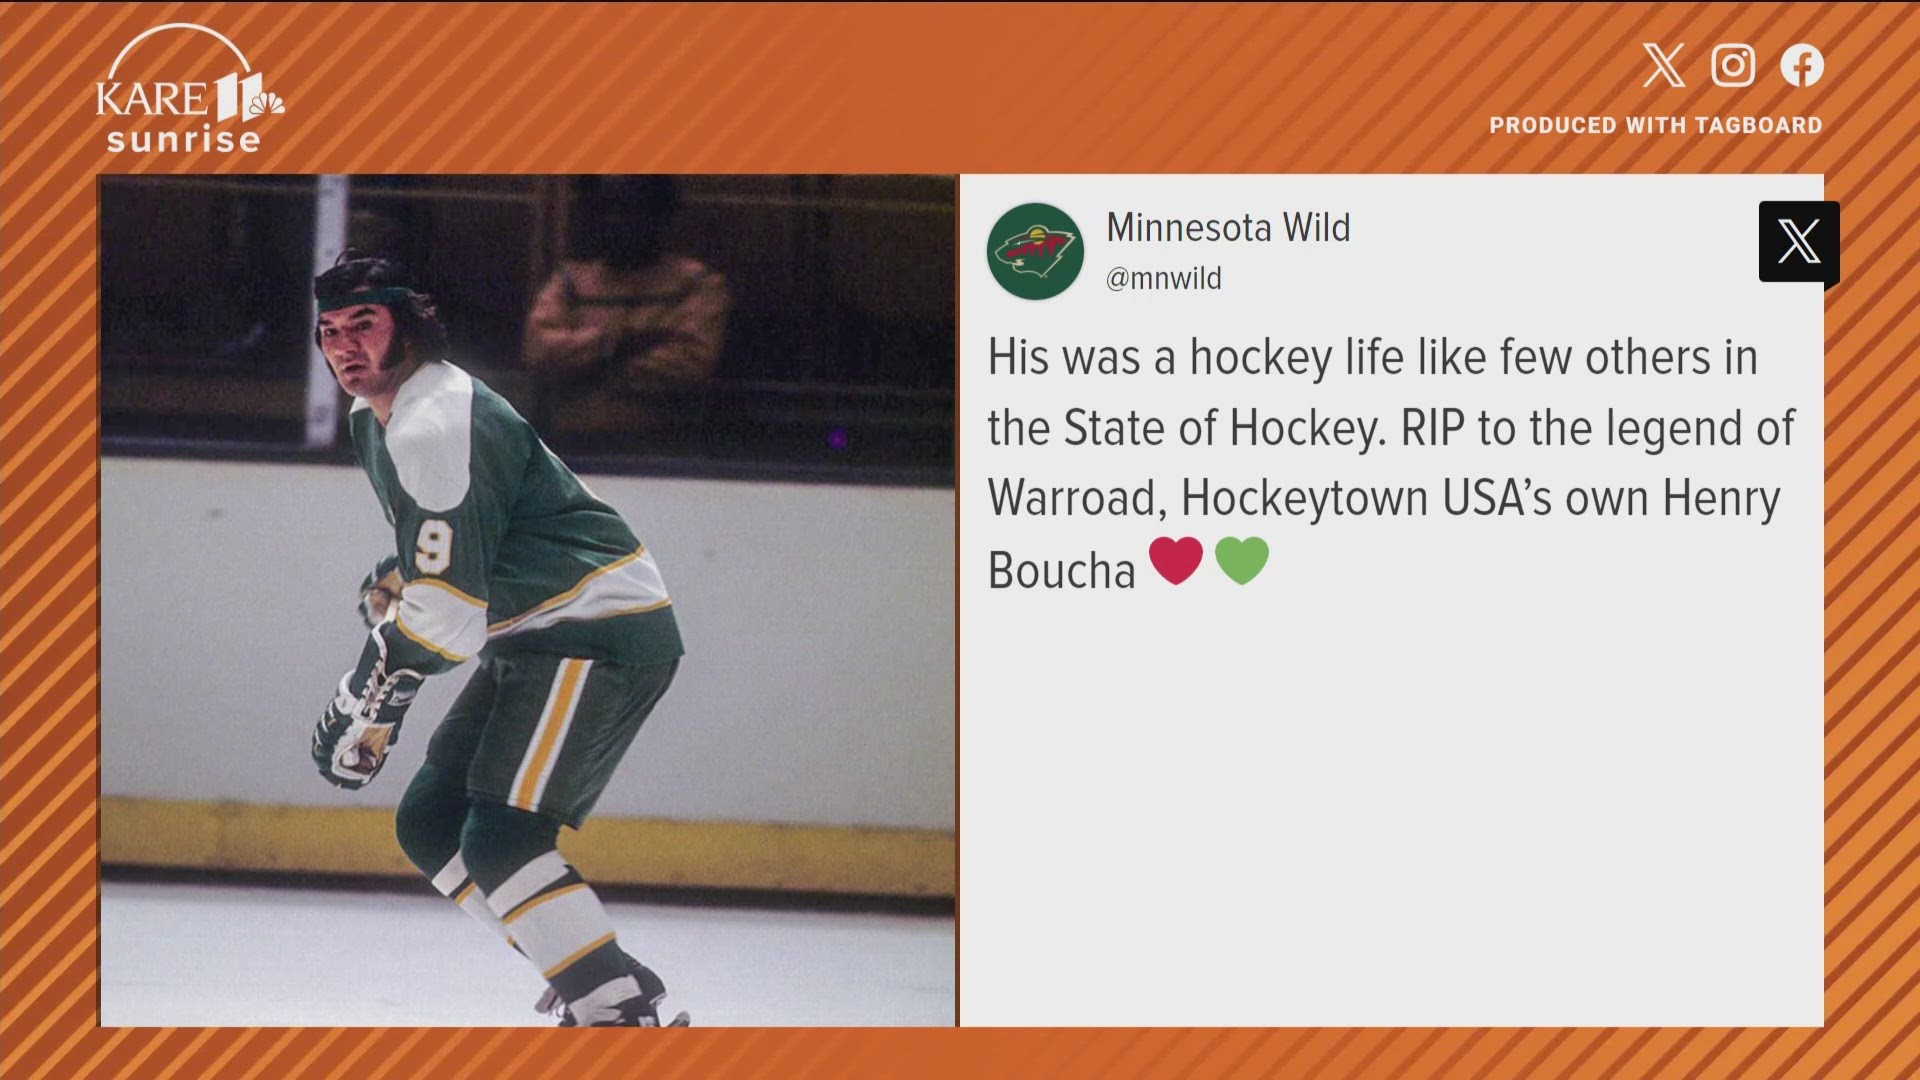 The Native American role model grew up in Warroad and skated his way to a noted NHL career.